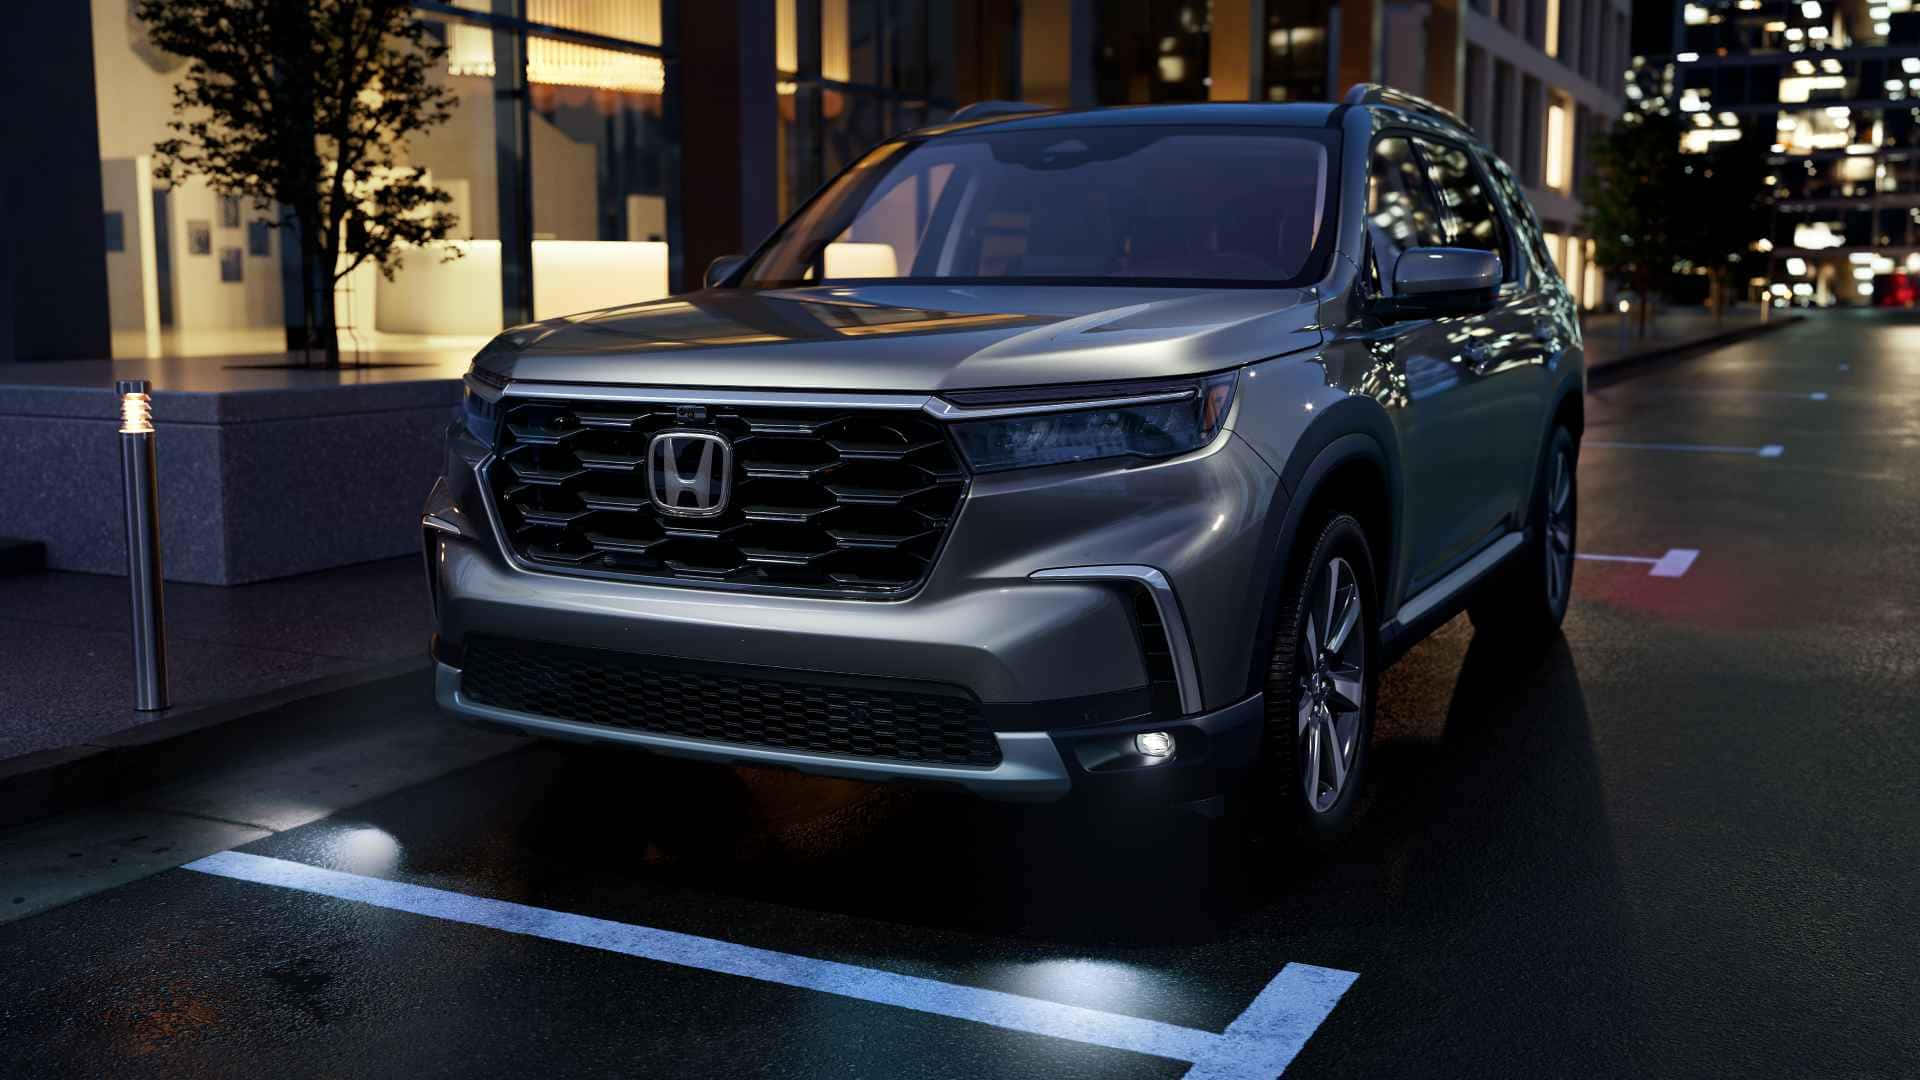 The 2020 Honda Pilot Is Parked In A City At Night